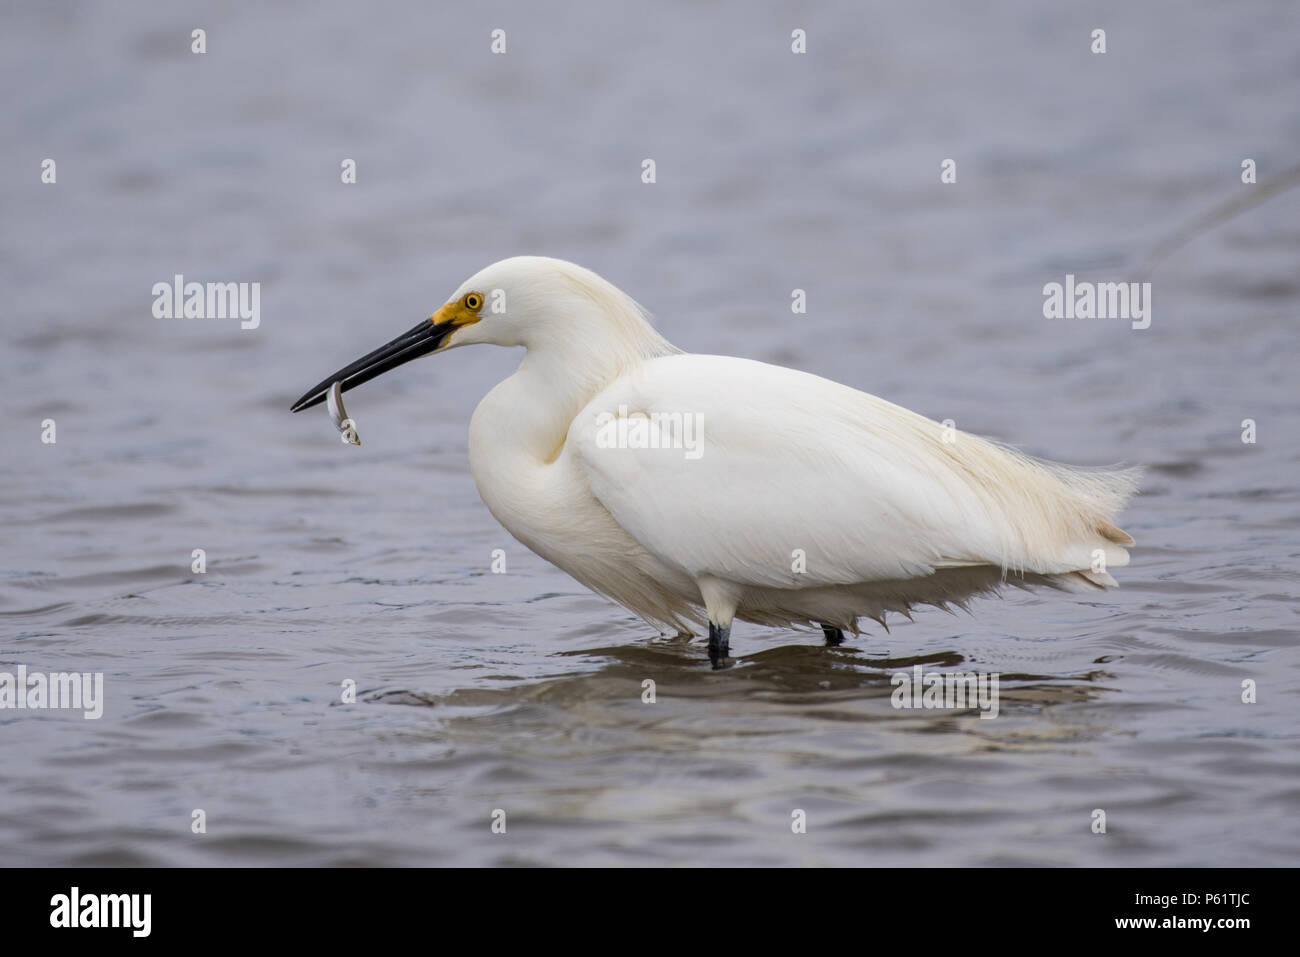 White egret holding fish anchovy on beak as a successful fishing attempt in the estuary. Stock Photo